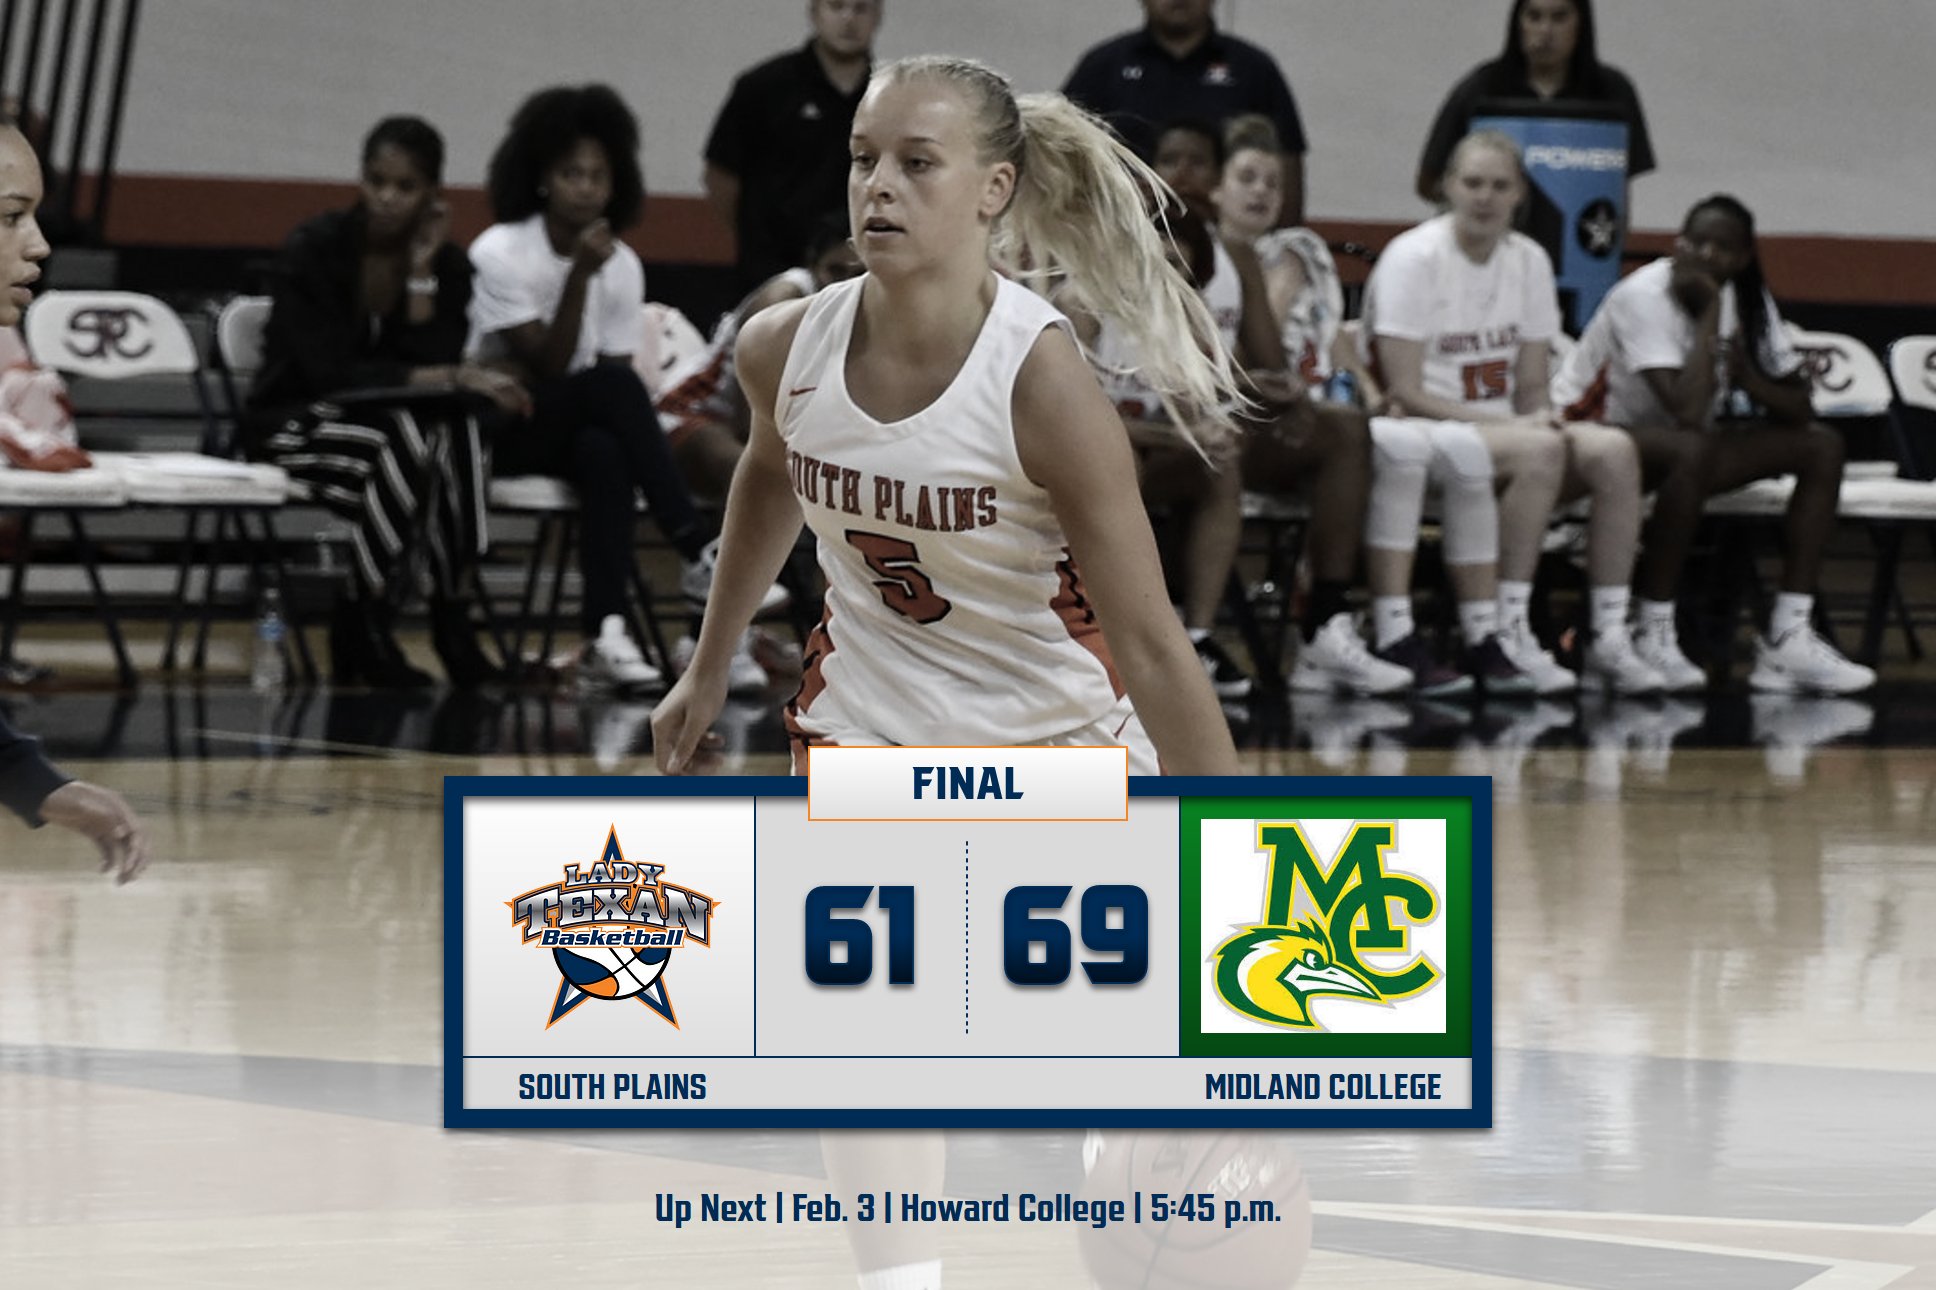 Midland clips Lady Texans 69-61 in overtime Monday